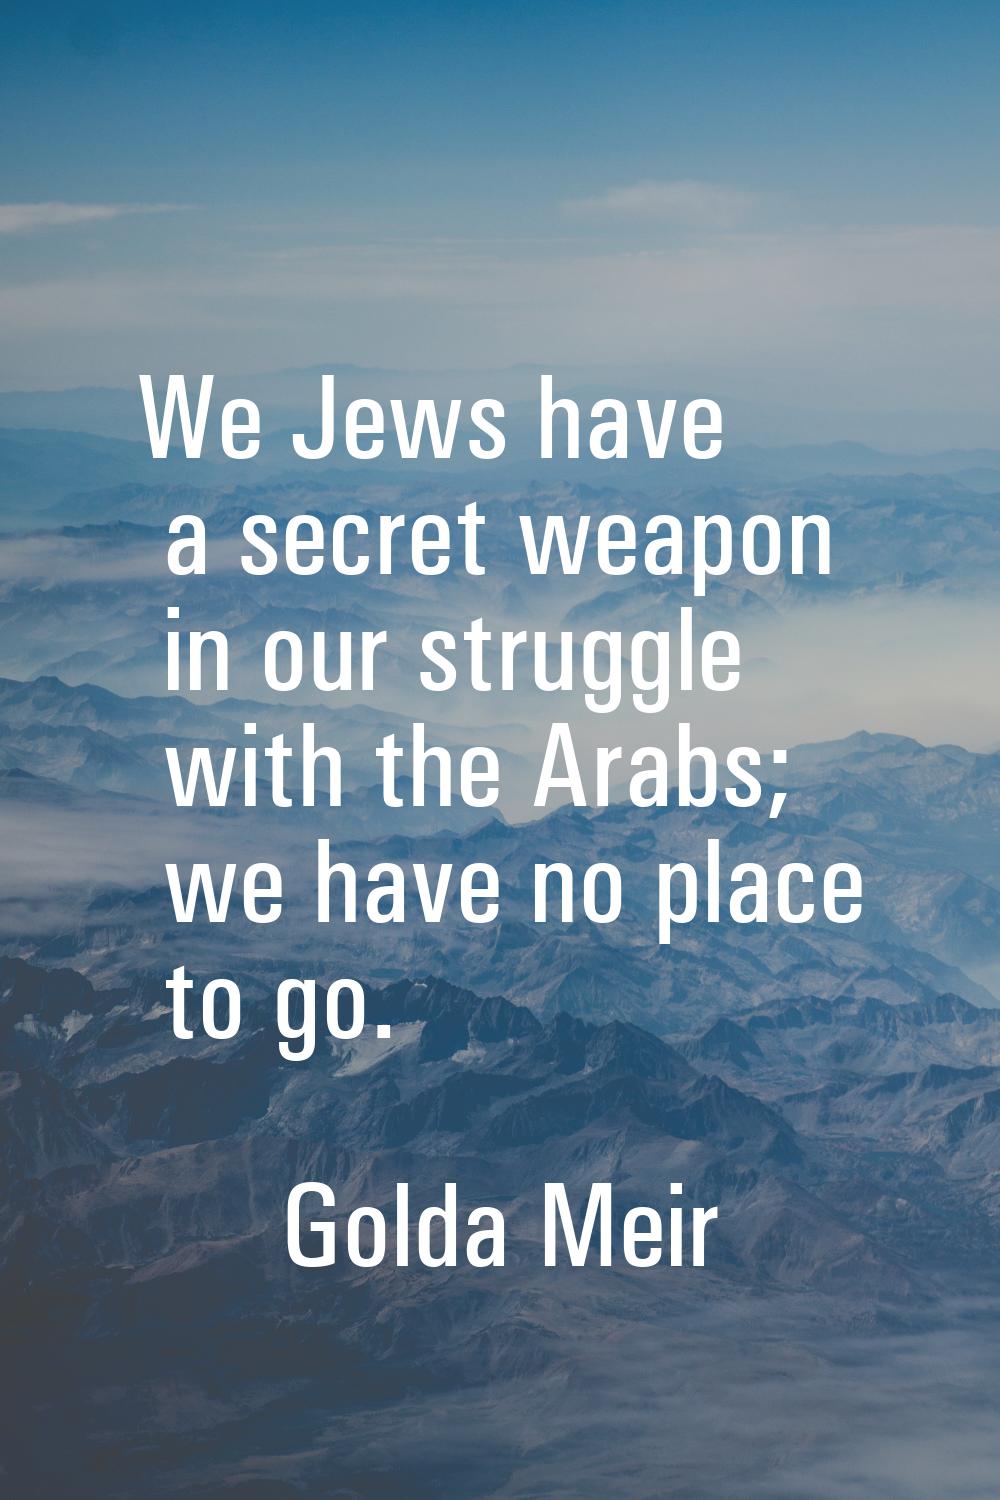 We Jews have a secret weapon in our struggle with the Arabs; we have no place to go.